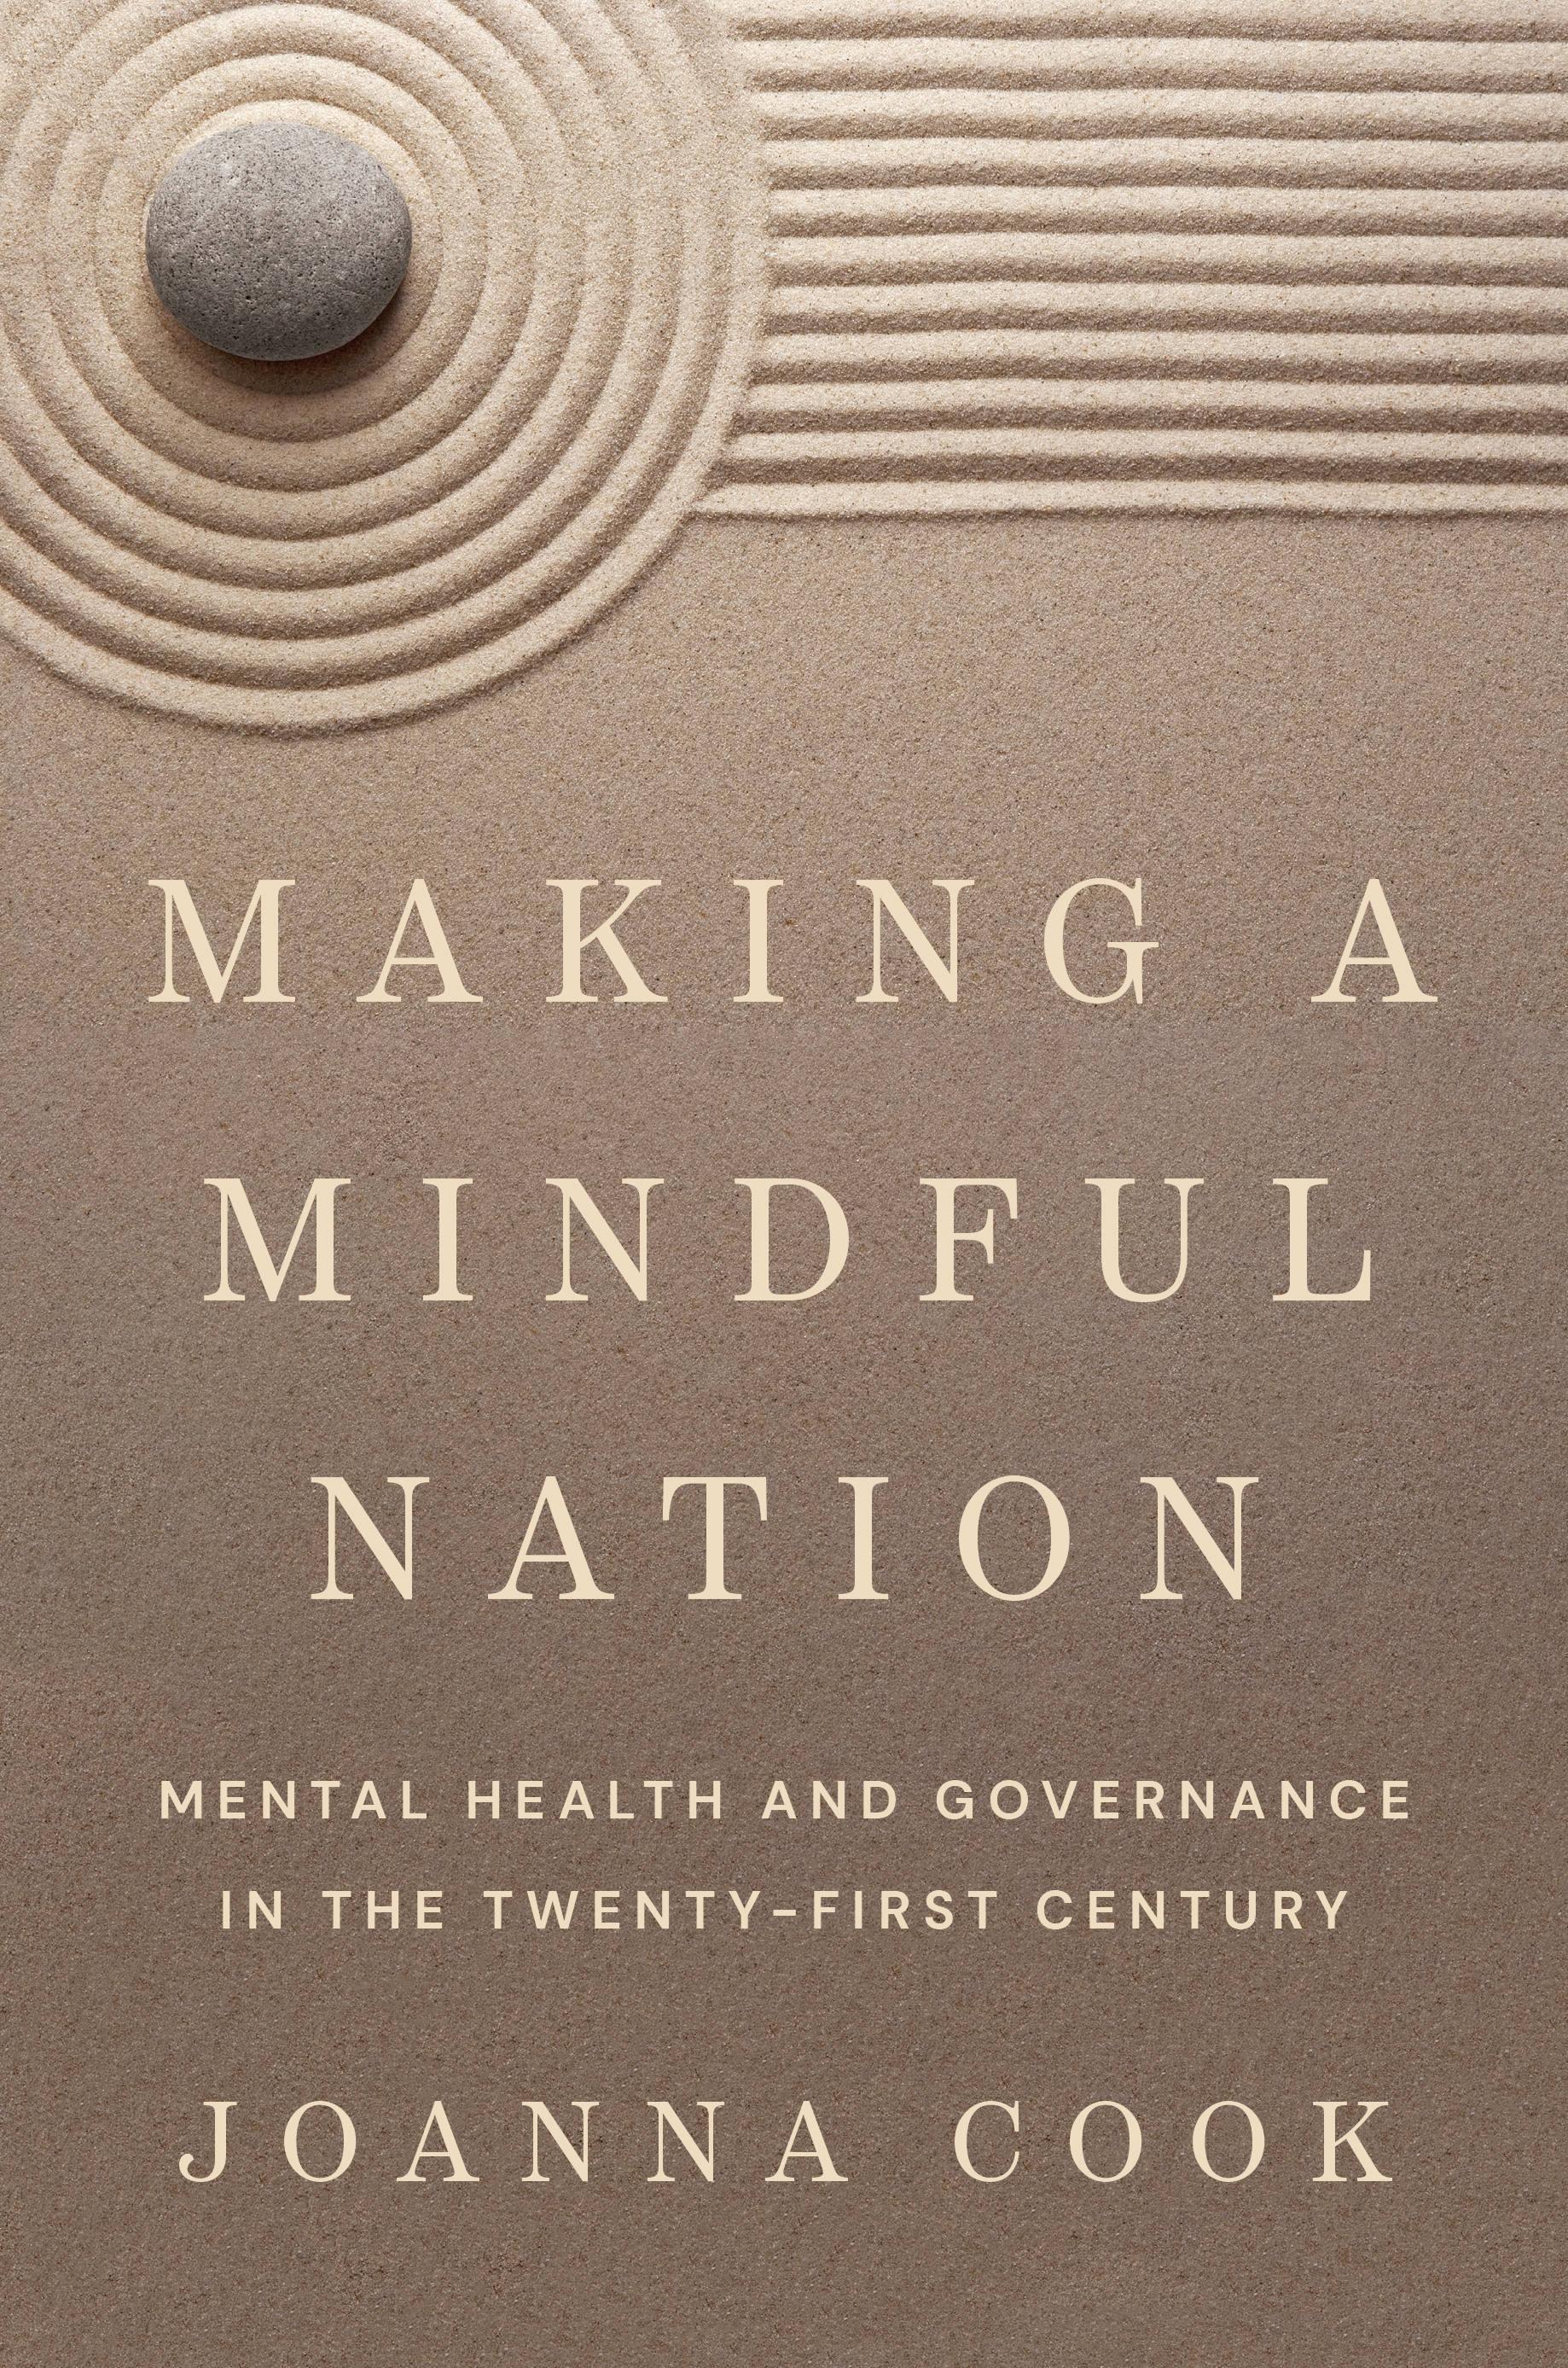 Mindfulness: Where It Comes From and What It Means [Book]